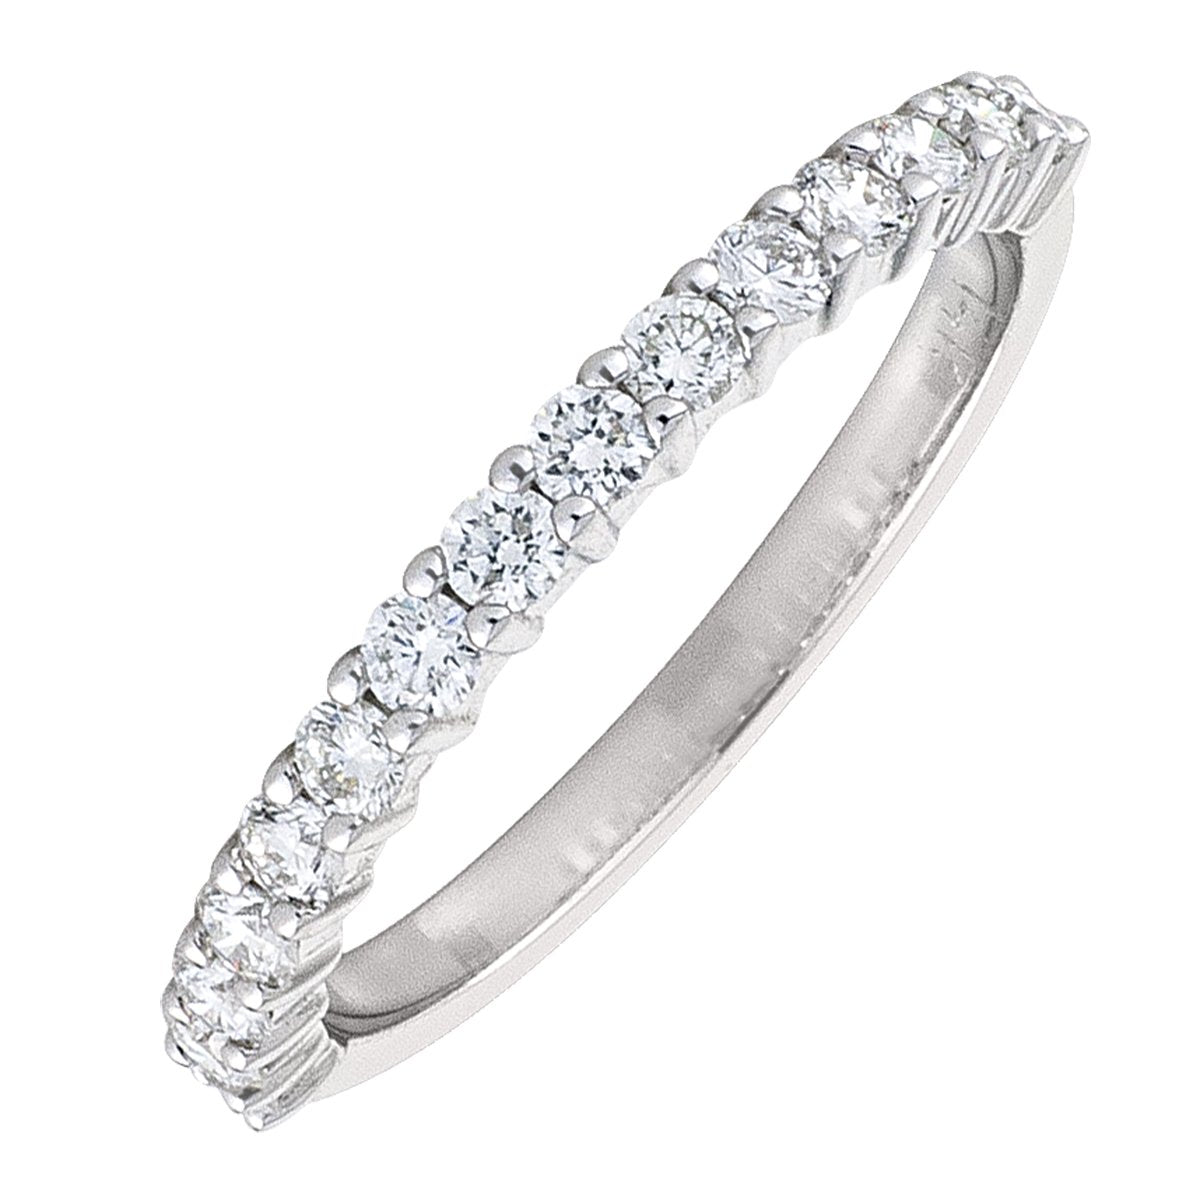 DIAMOND RINGS WHITE GOLD DIAMOND SHARED CLAW HALF ETERNITY BAND (AVAILABE IN VARIOUS STONE AND SIZE).